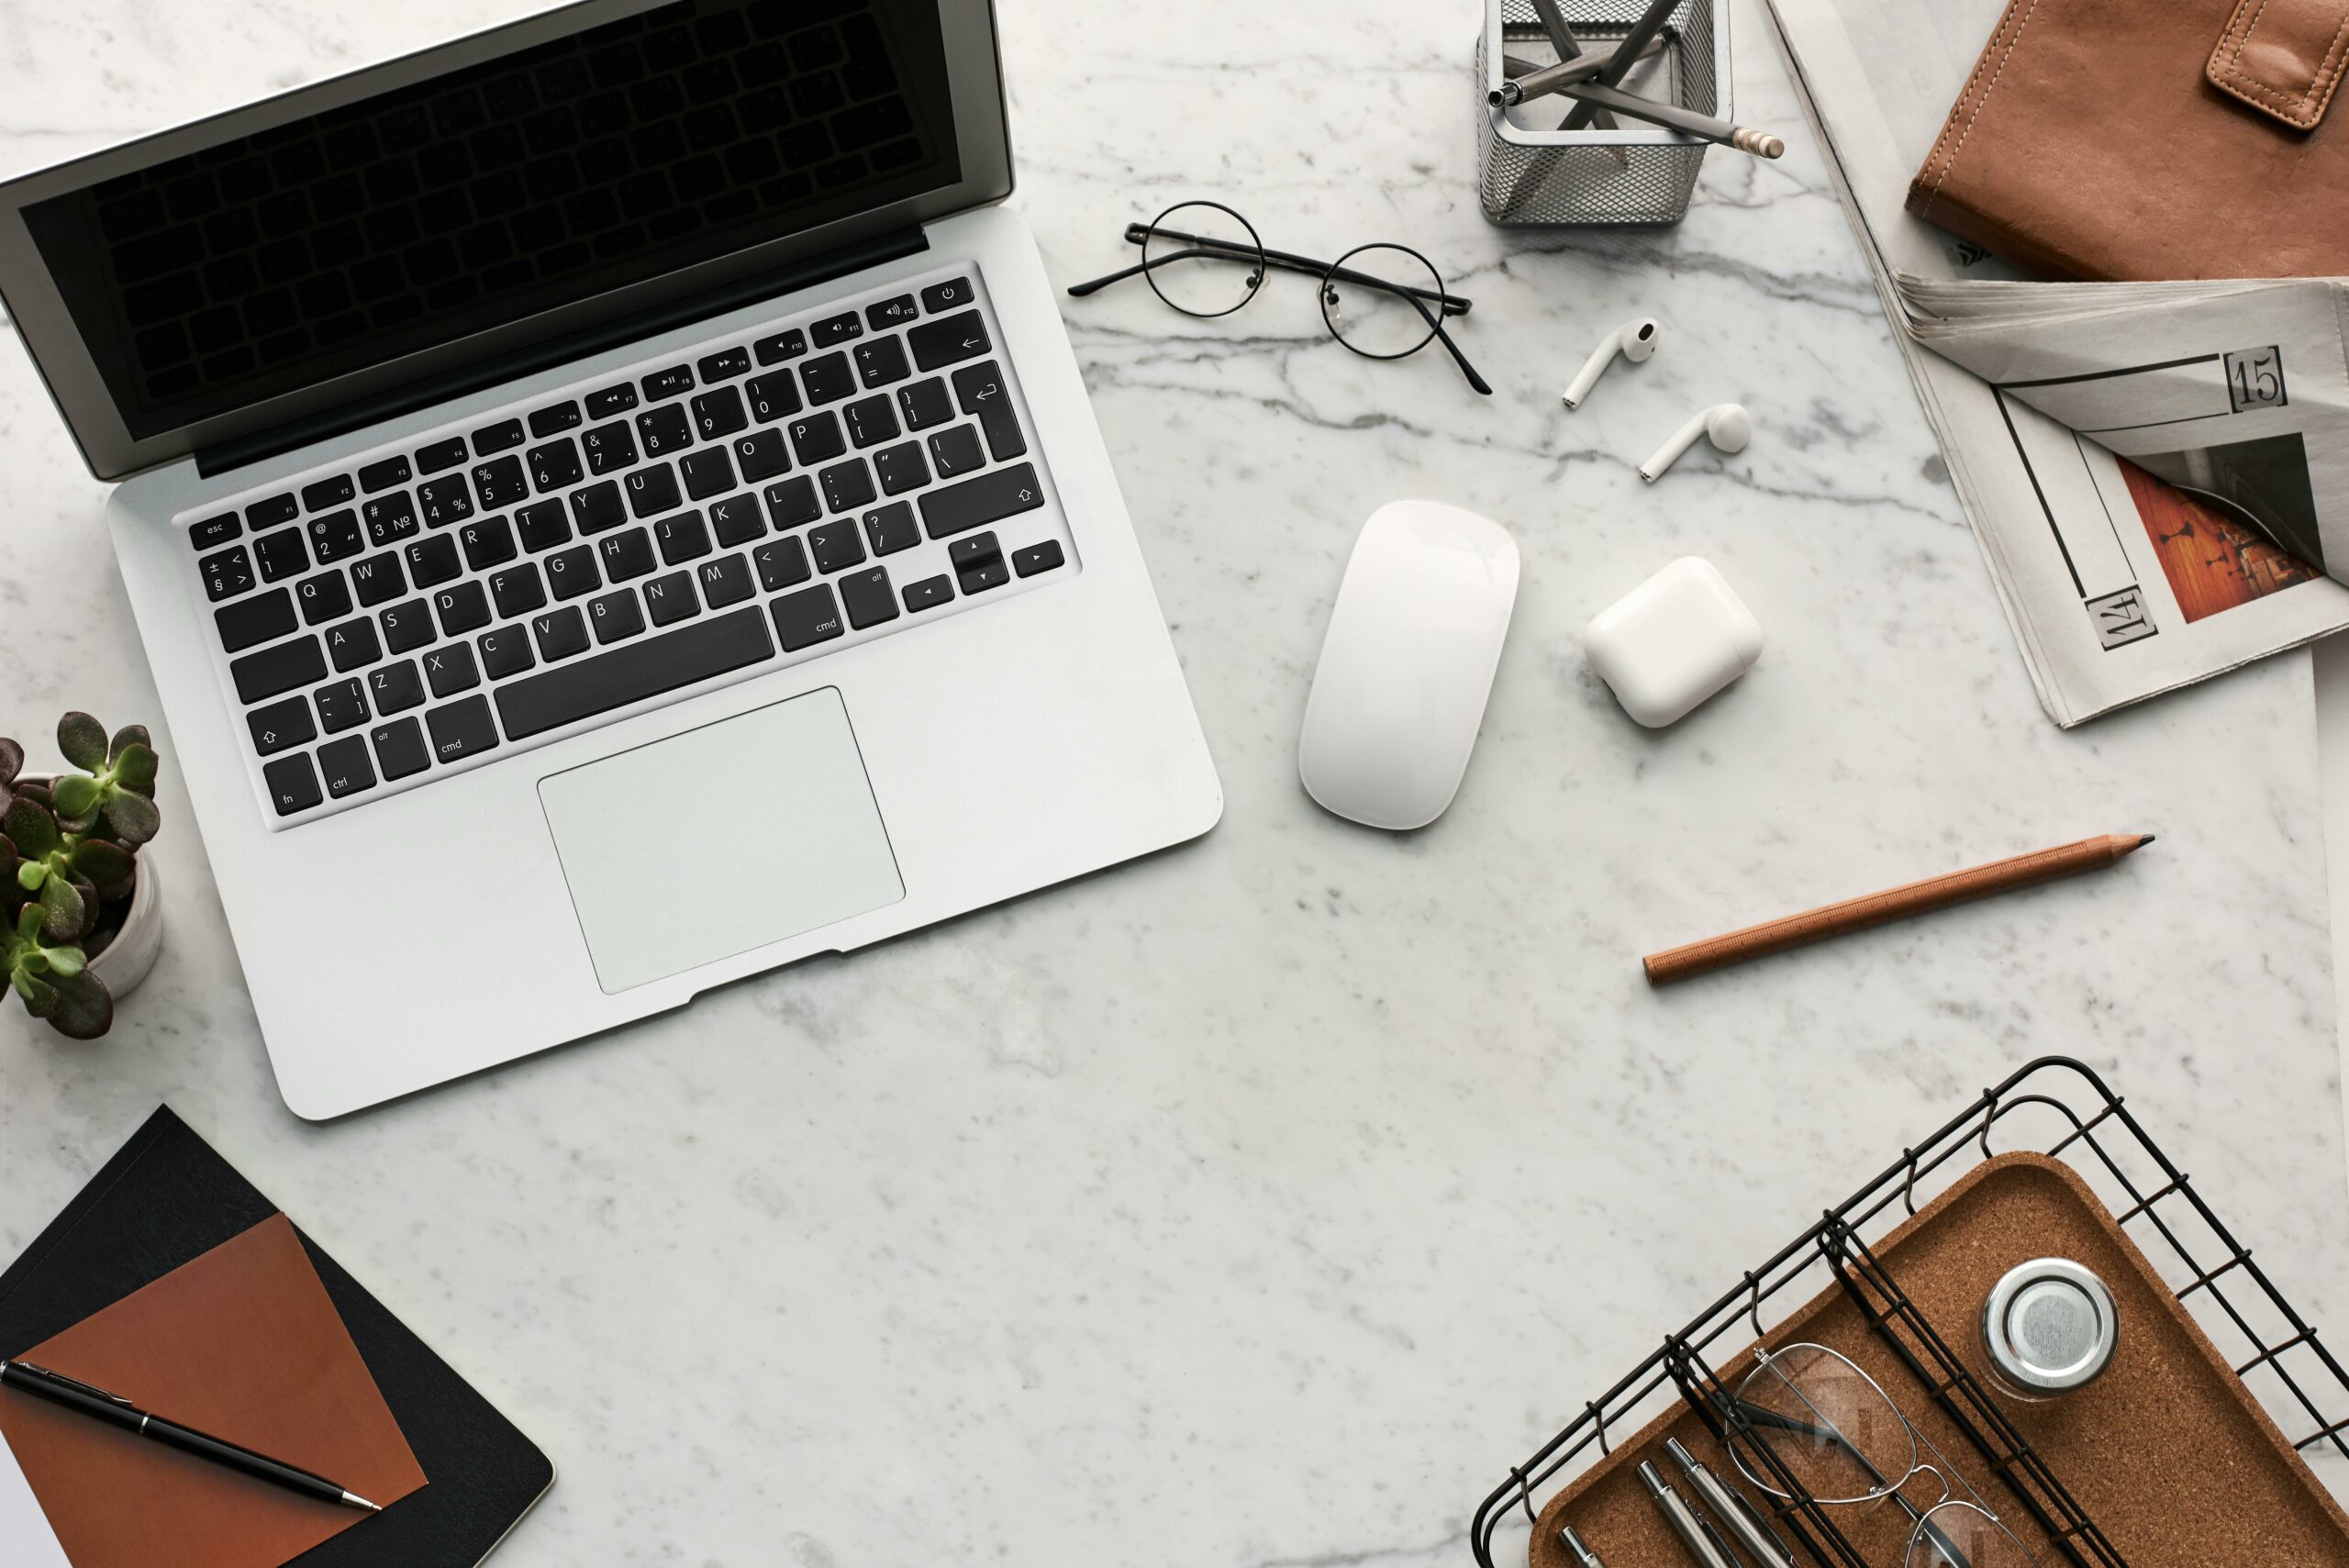 Macbook Laptop on a white table with glasses, wireless mouse, pencil, and other office items